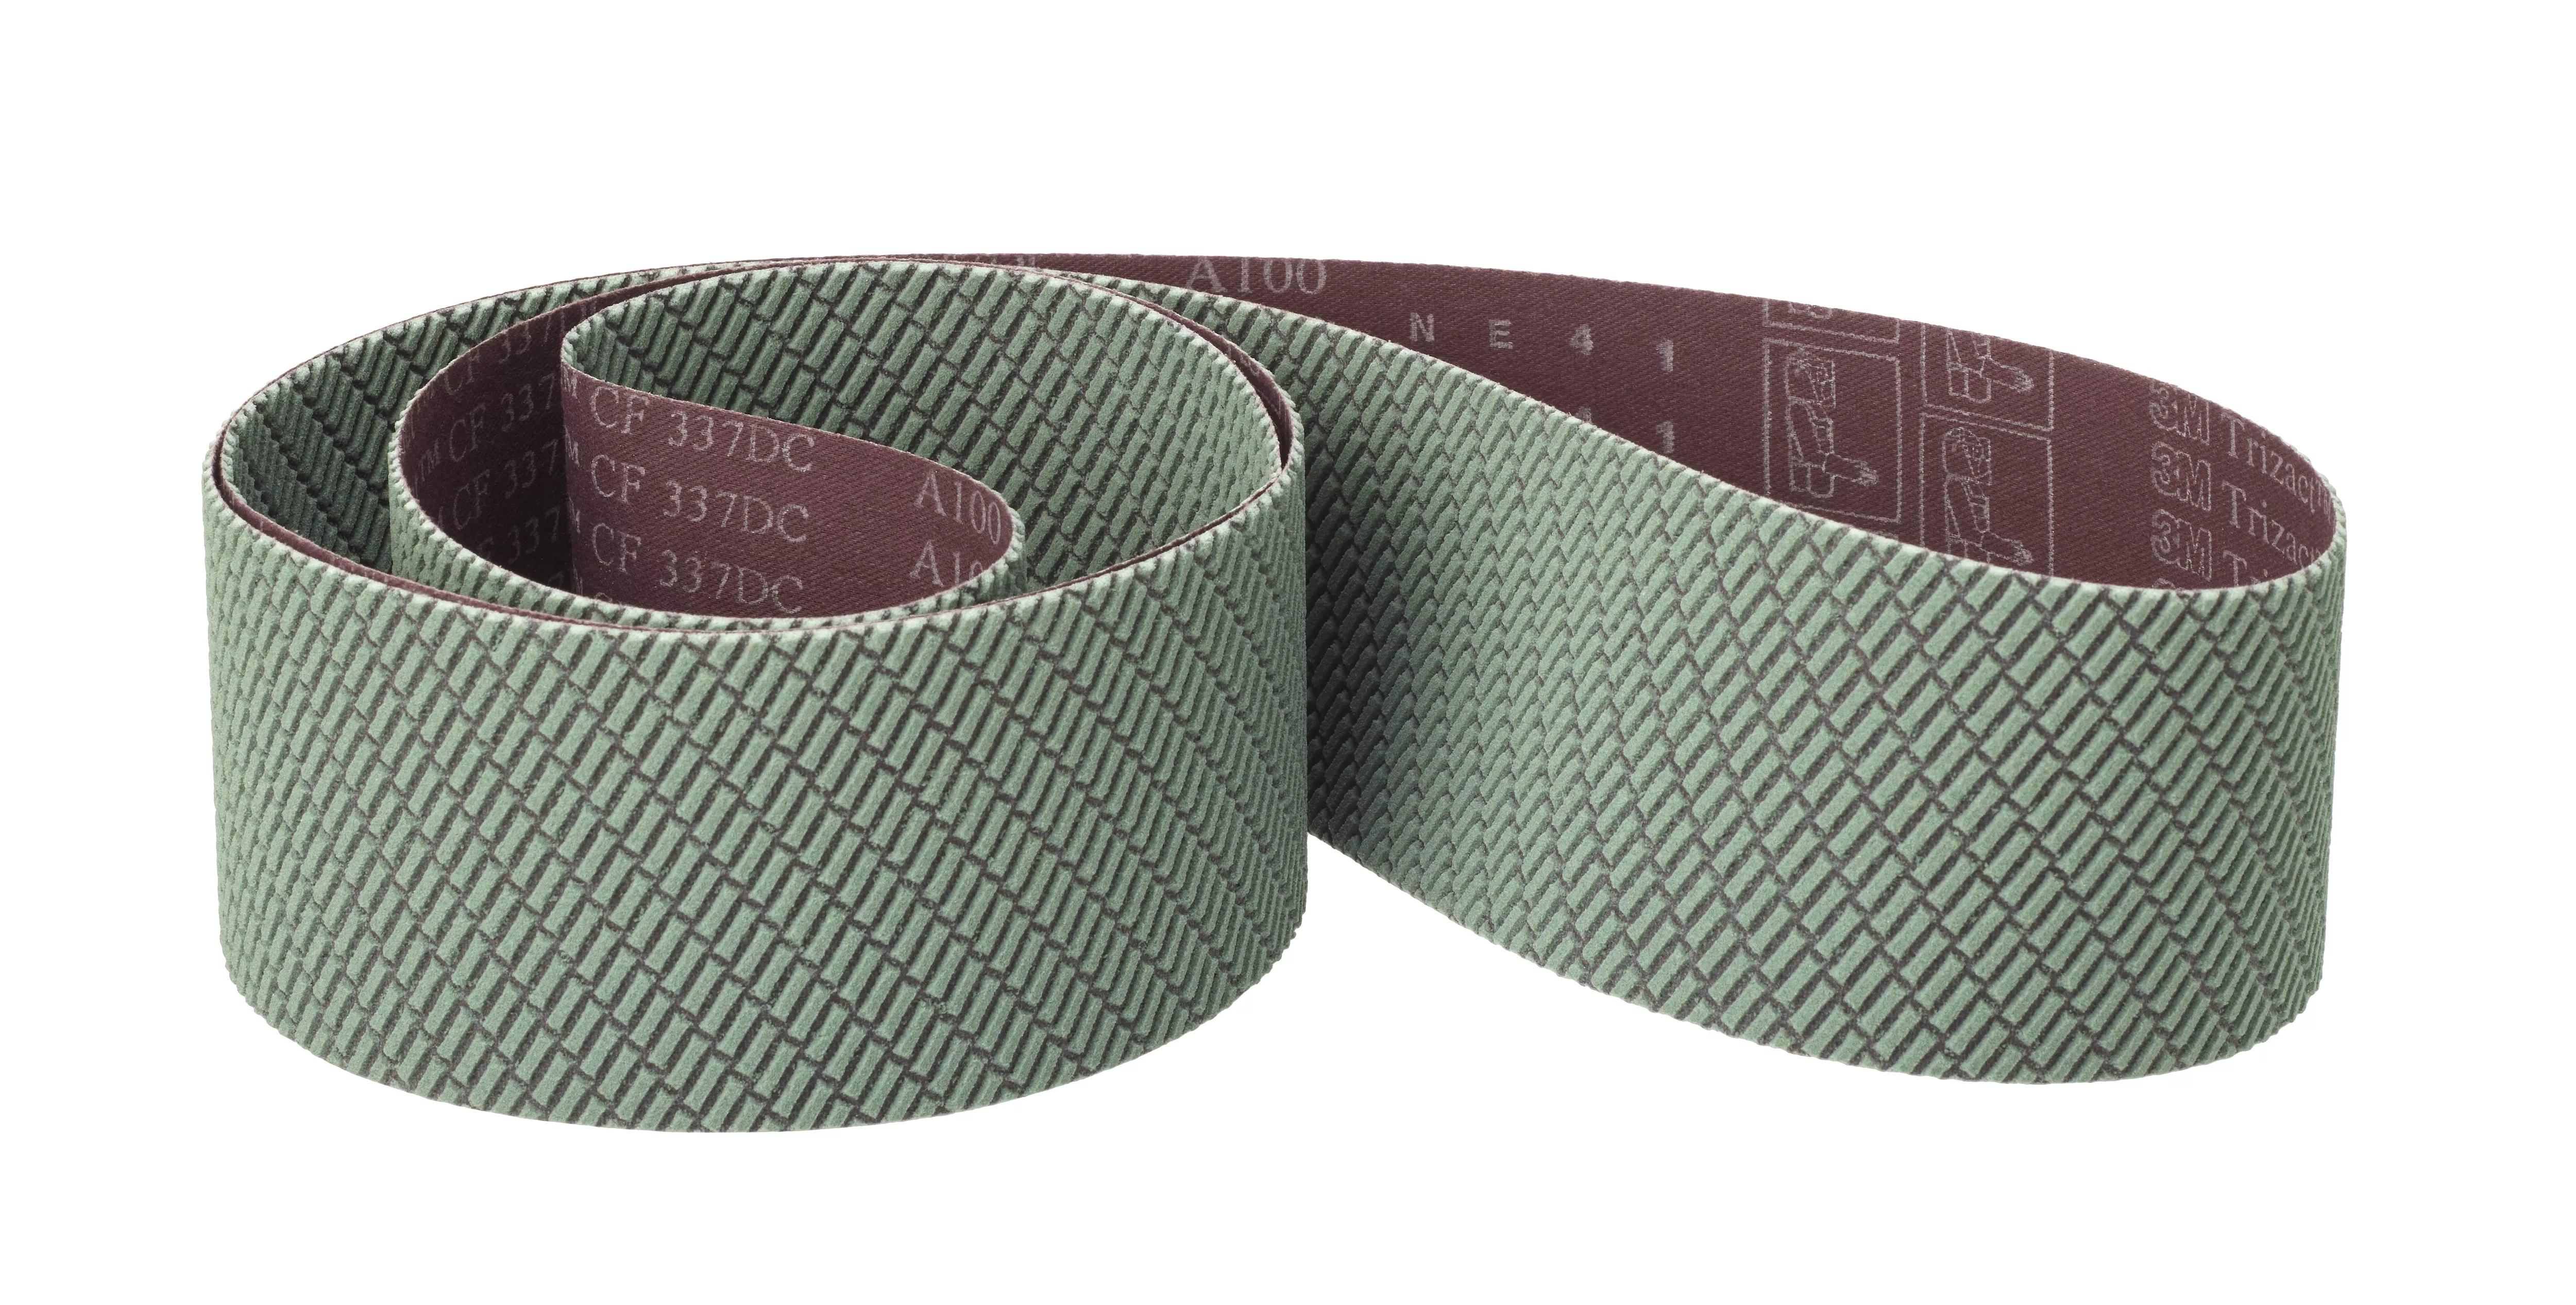 3M™ Trizact™ Cloth Belt 337DC, 3 1/2 in x 15 1/2 in, A160, X-weight,
10/Pac, 50 ea/Case